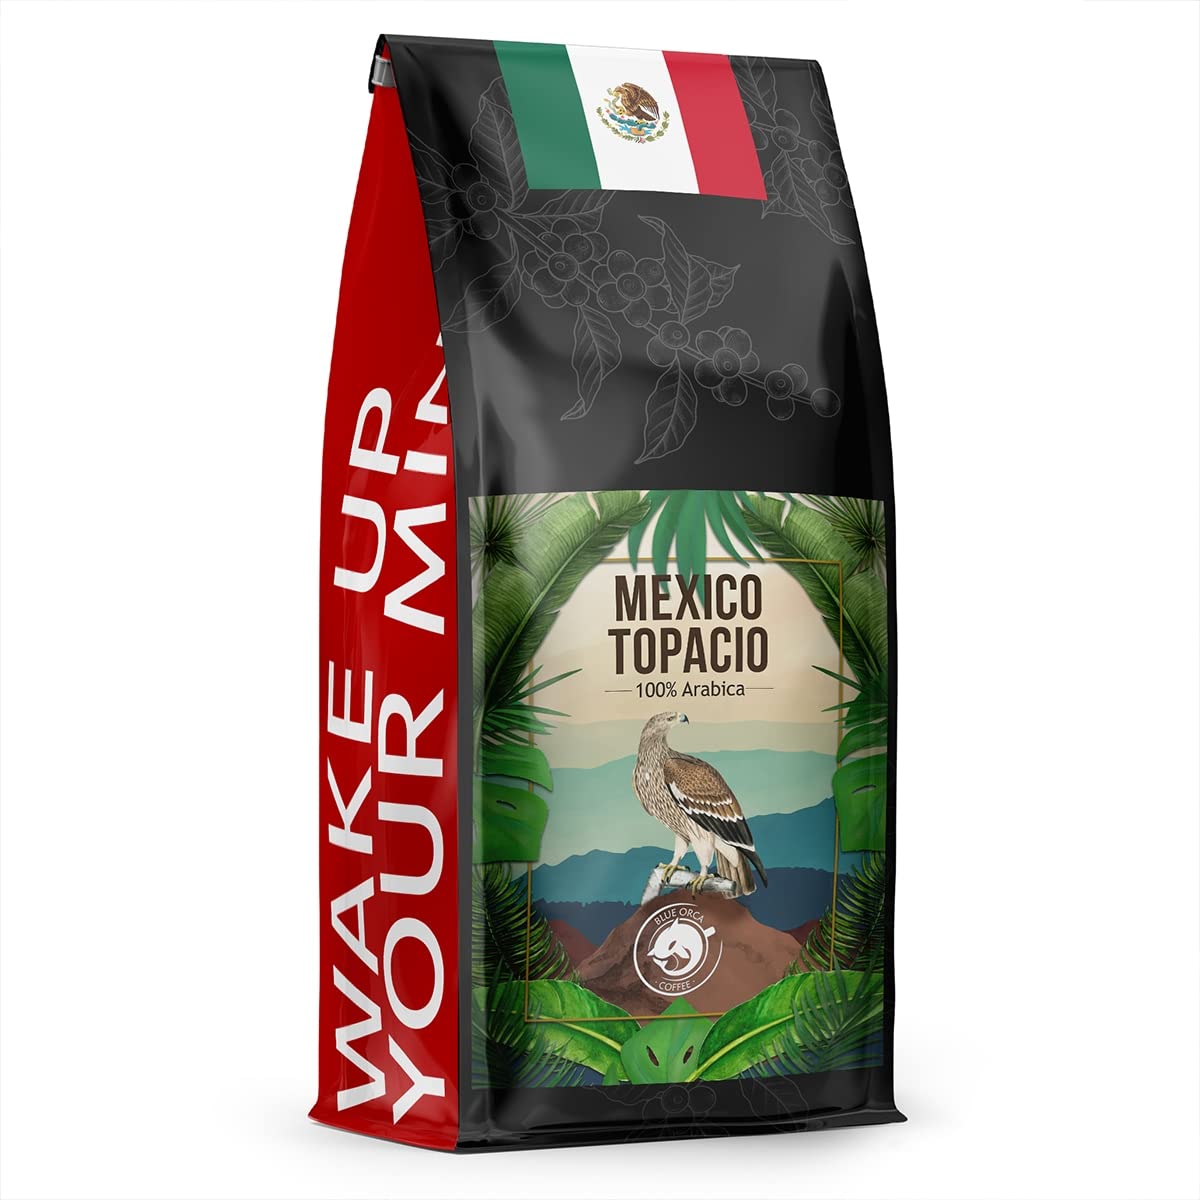 Blue Orca Coffee - MEXICO TOPACIO - Specialty Coffee Beans from Mexico - Freshly Roasted - Single Origin - SCA 83 points, 1 kg
